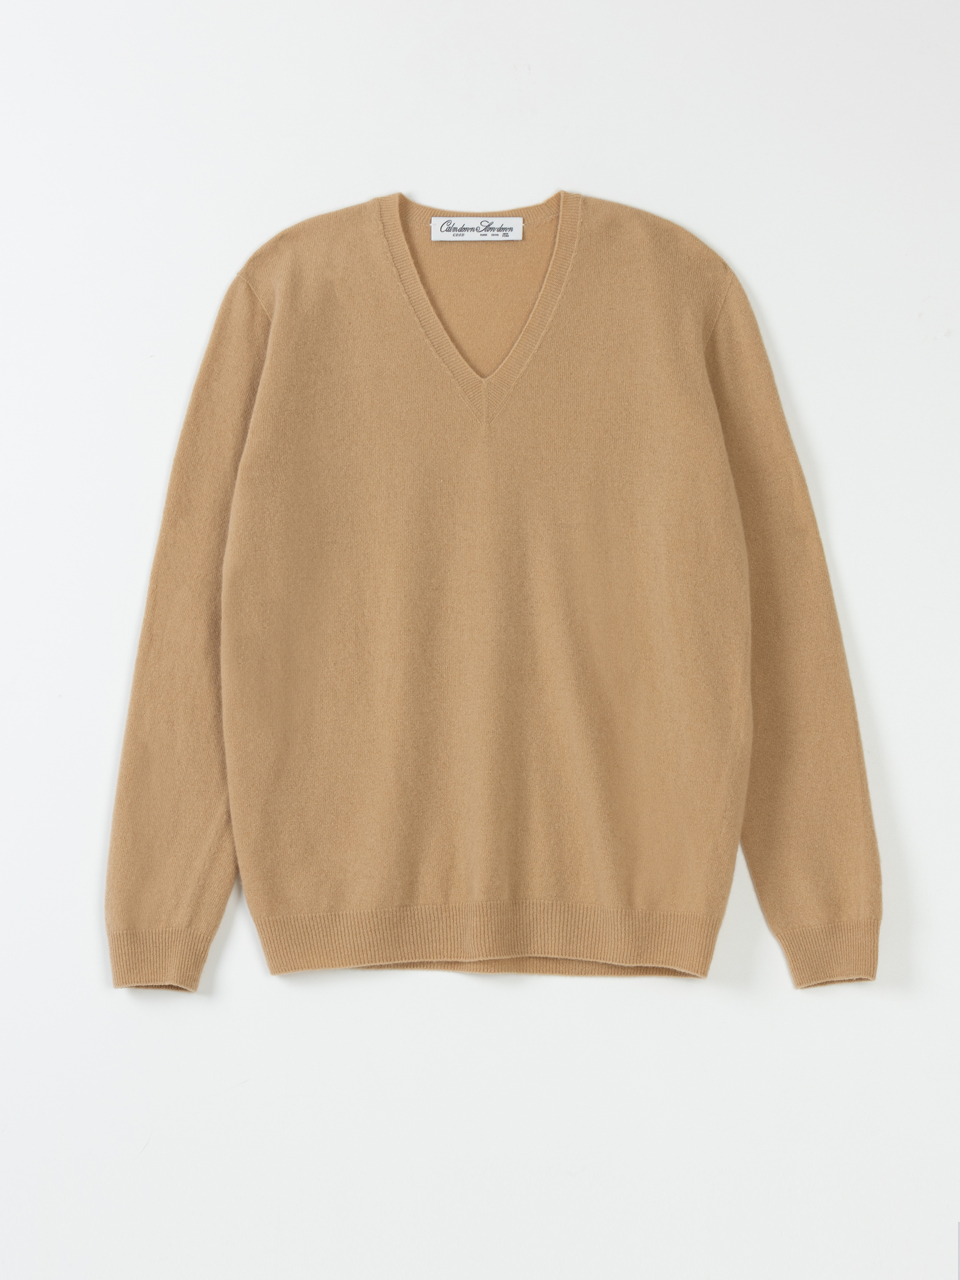 Wool cashmere v-neck knit_beige (10월 초 재입고 예정)